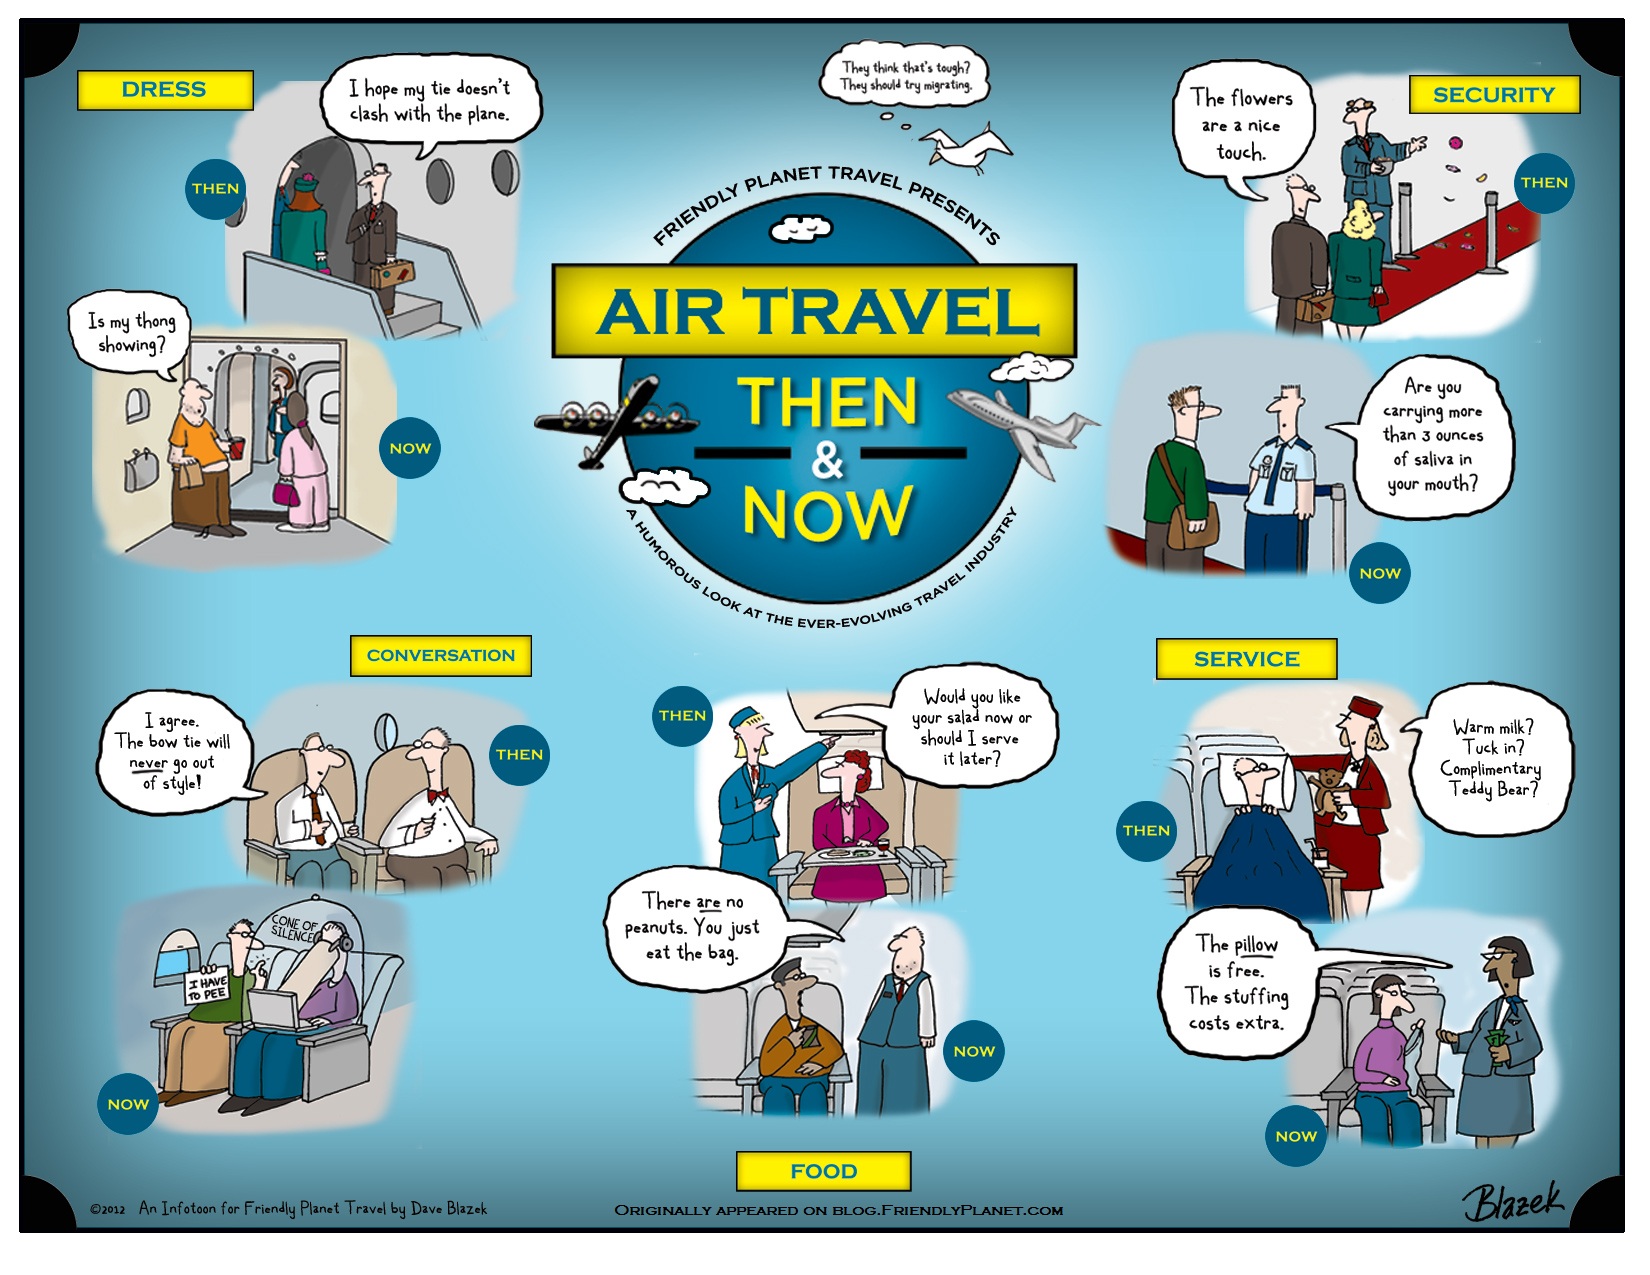 Air travel: then and now